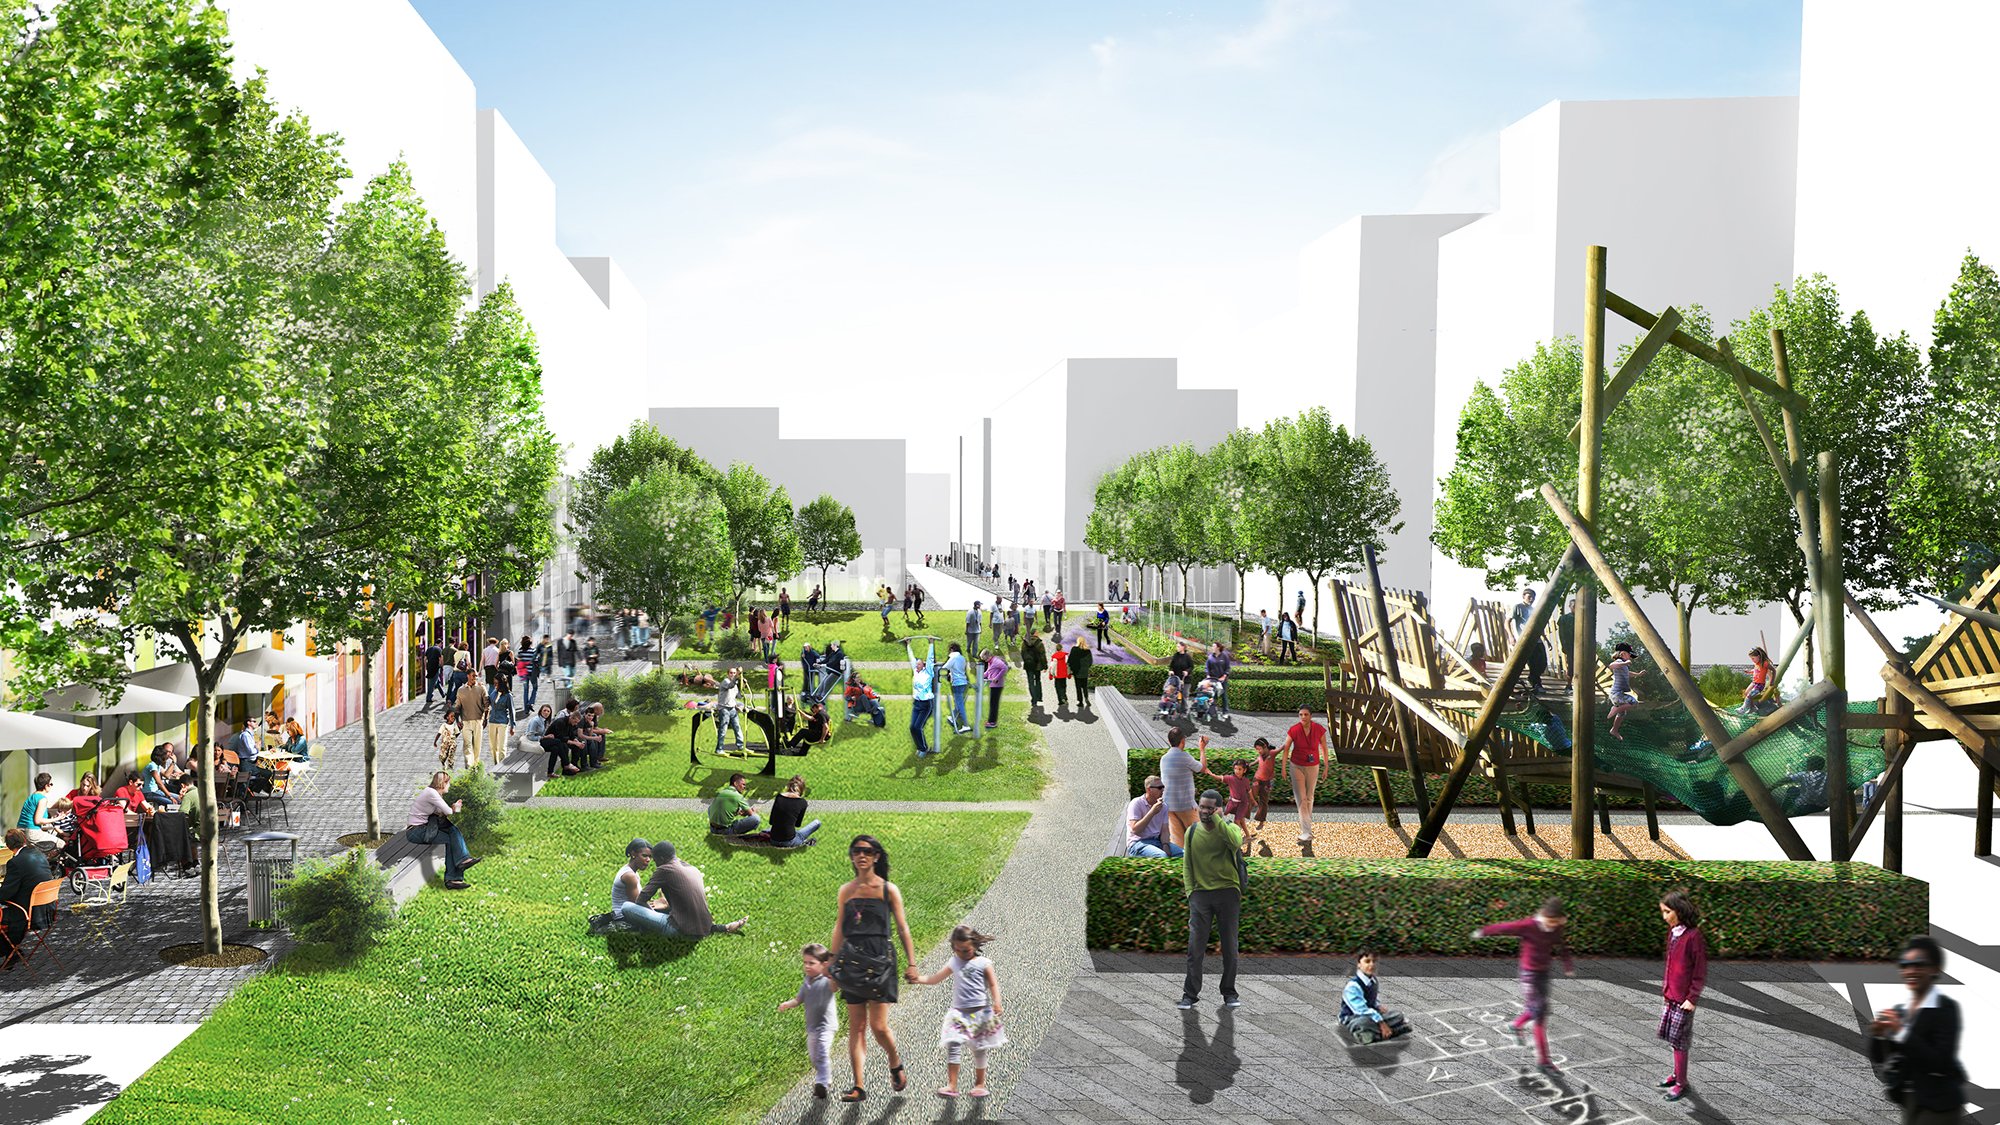 North of White Hart Lane, a new residential neighbourhood with open space at its centre will be created, with a large community park called Peacock Park.